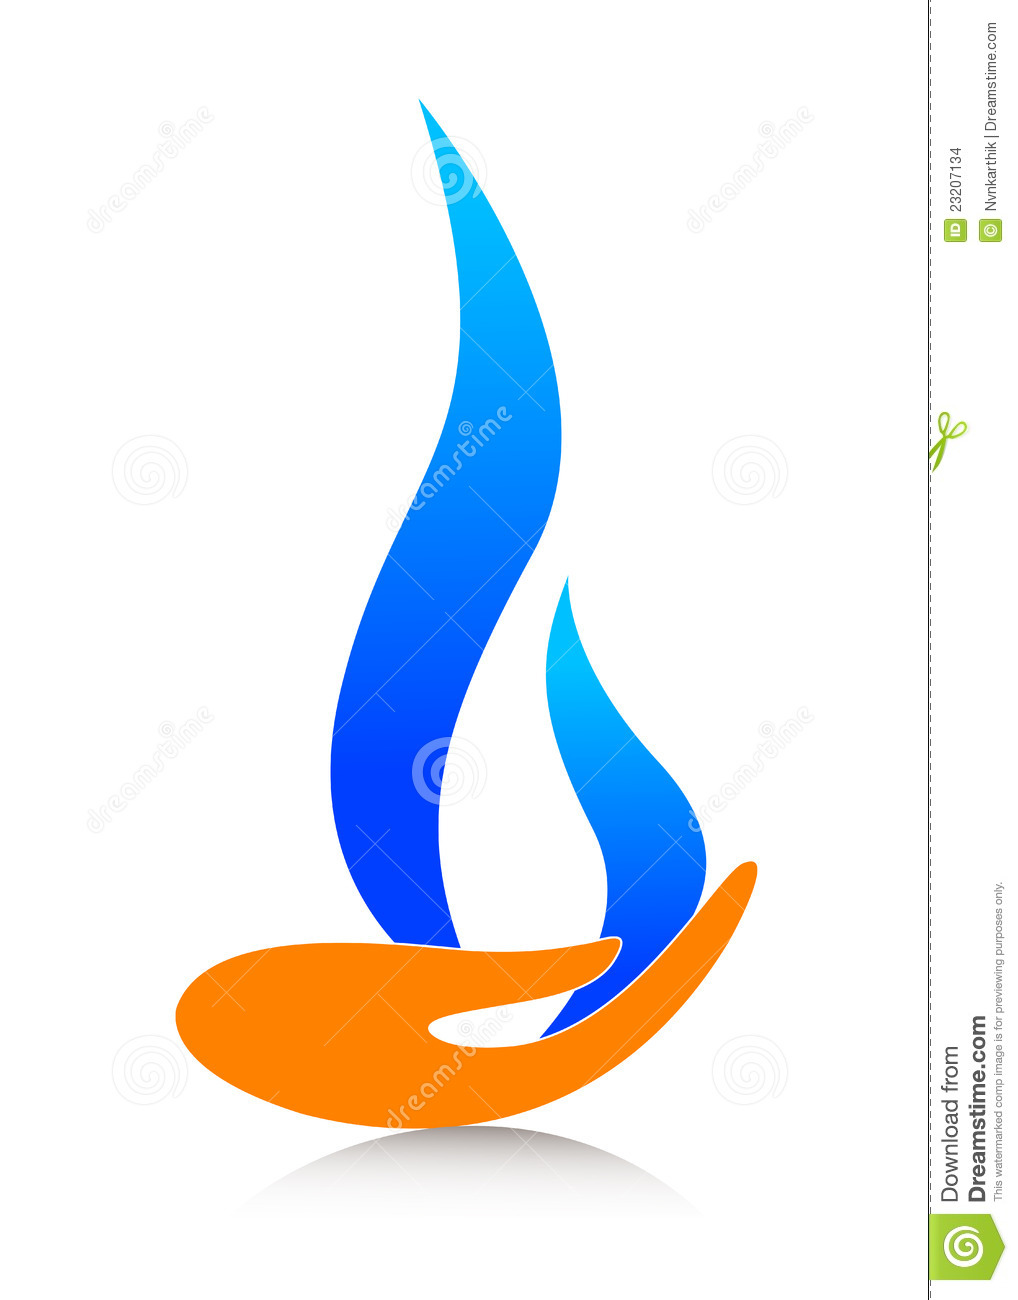 Flame Logo Stock Images   Image  23207134